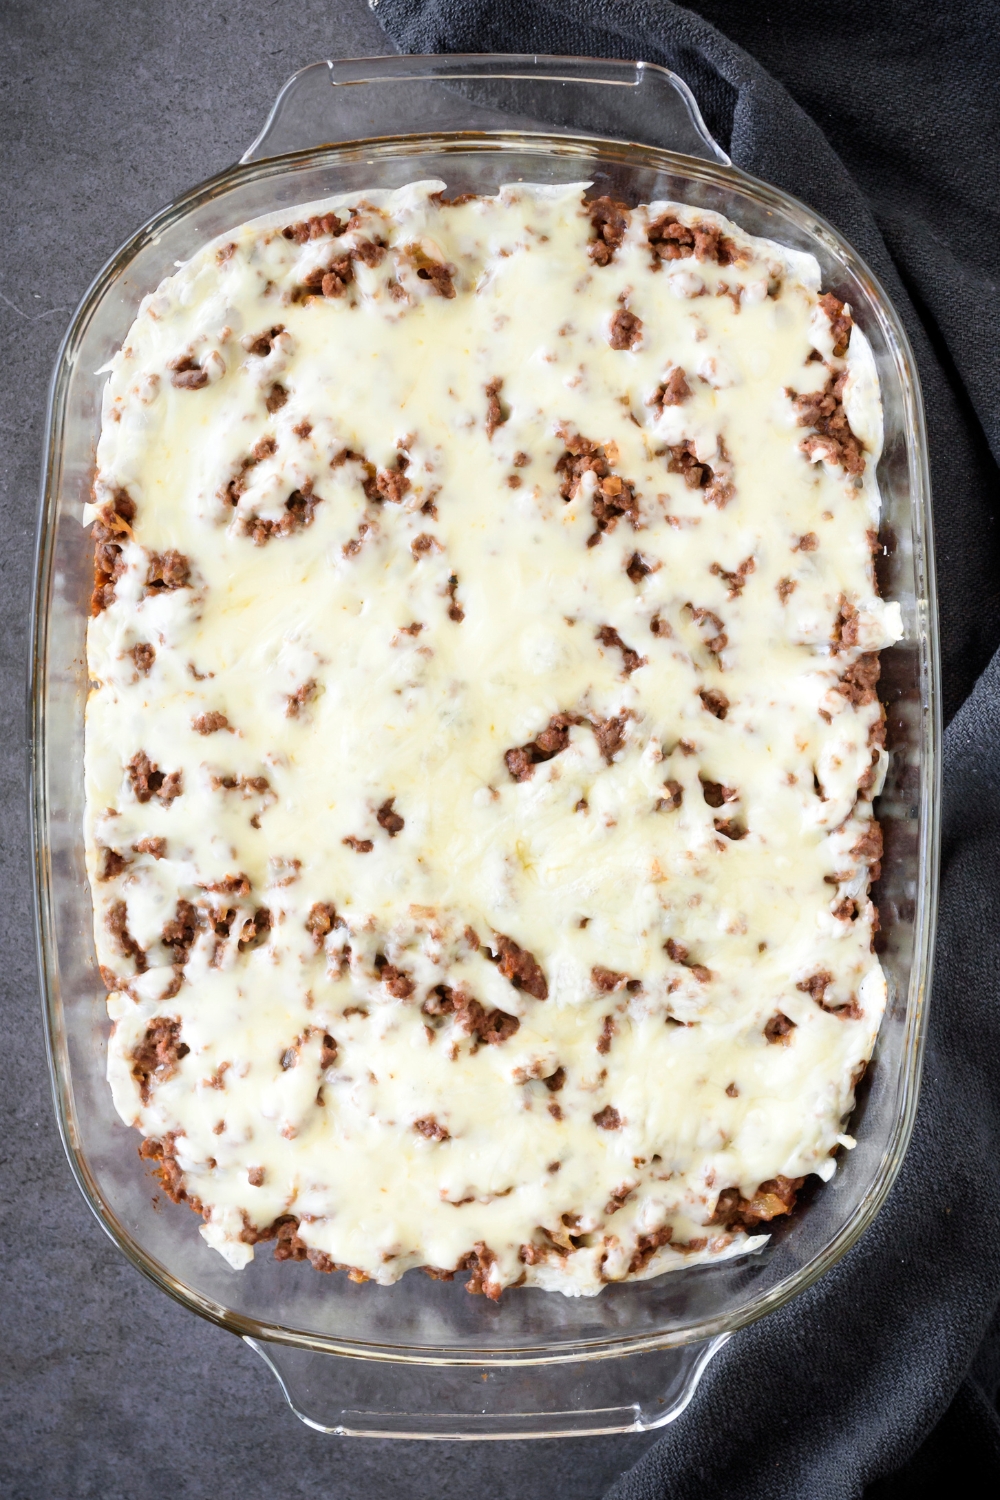 A baking dish filled with cooked and seasoned ground beef covered in melted cheese.